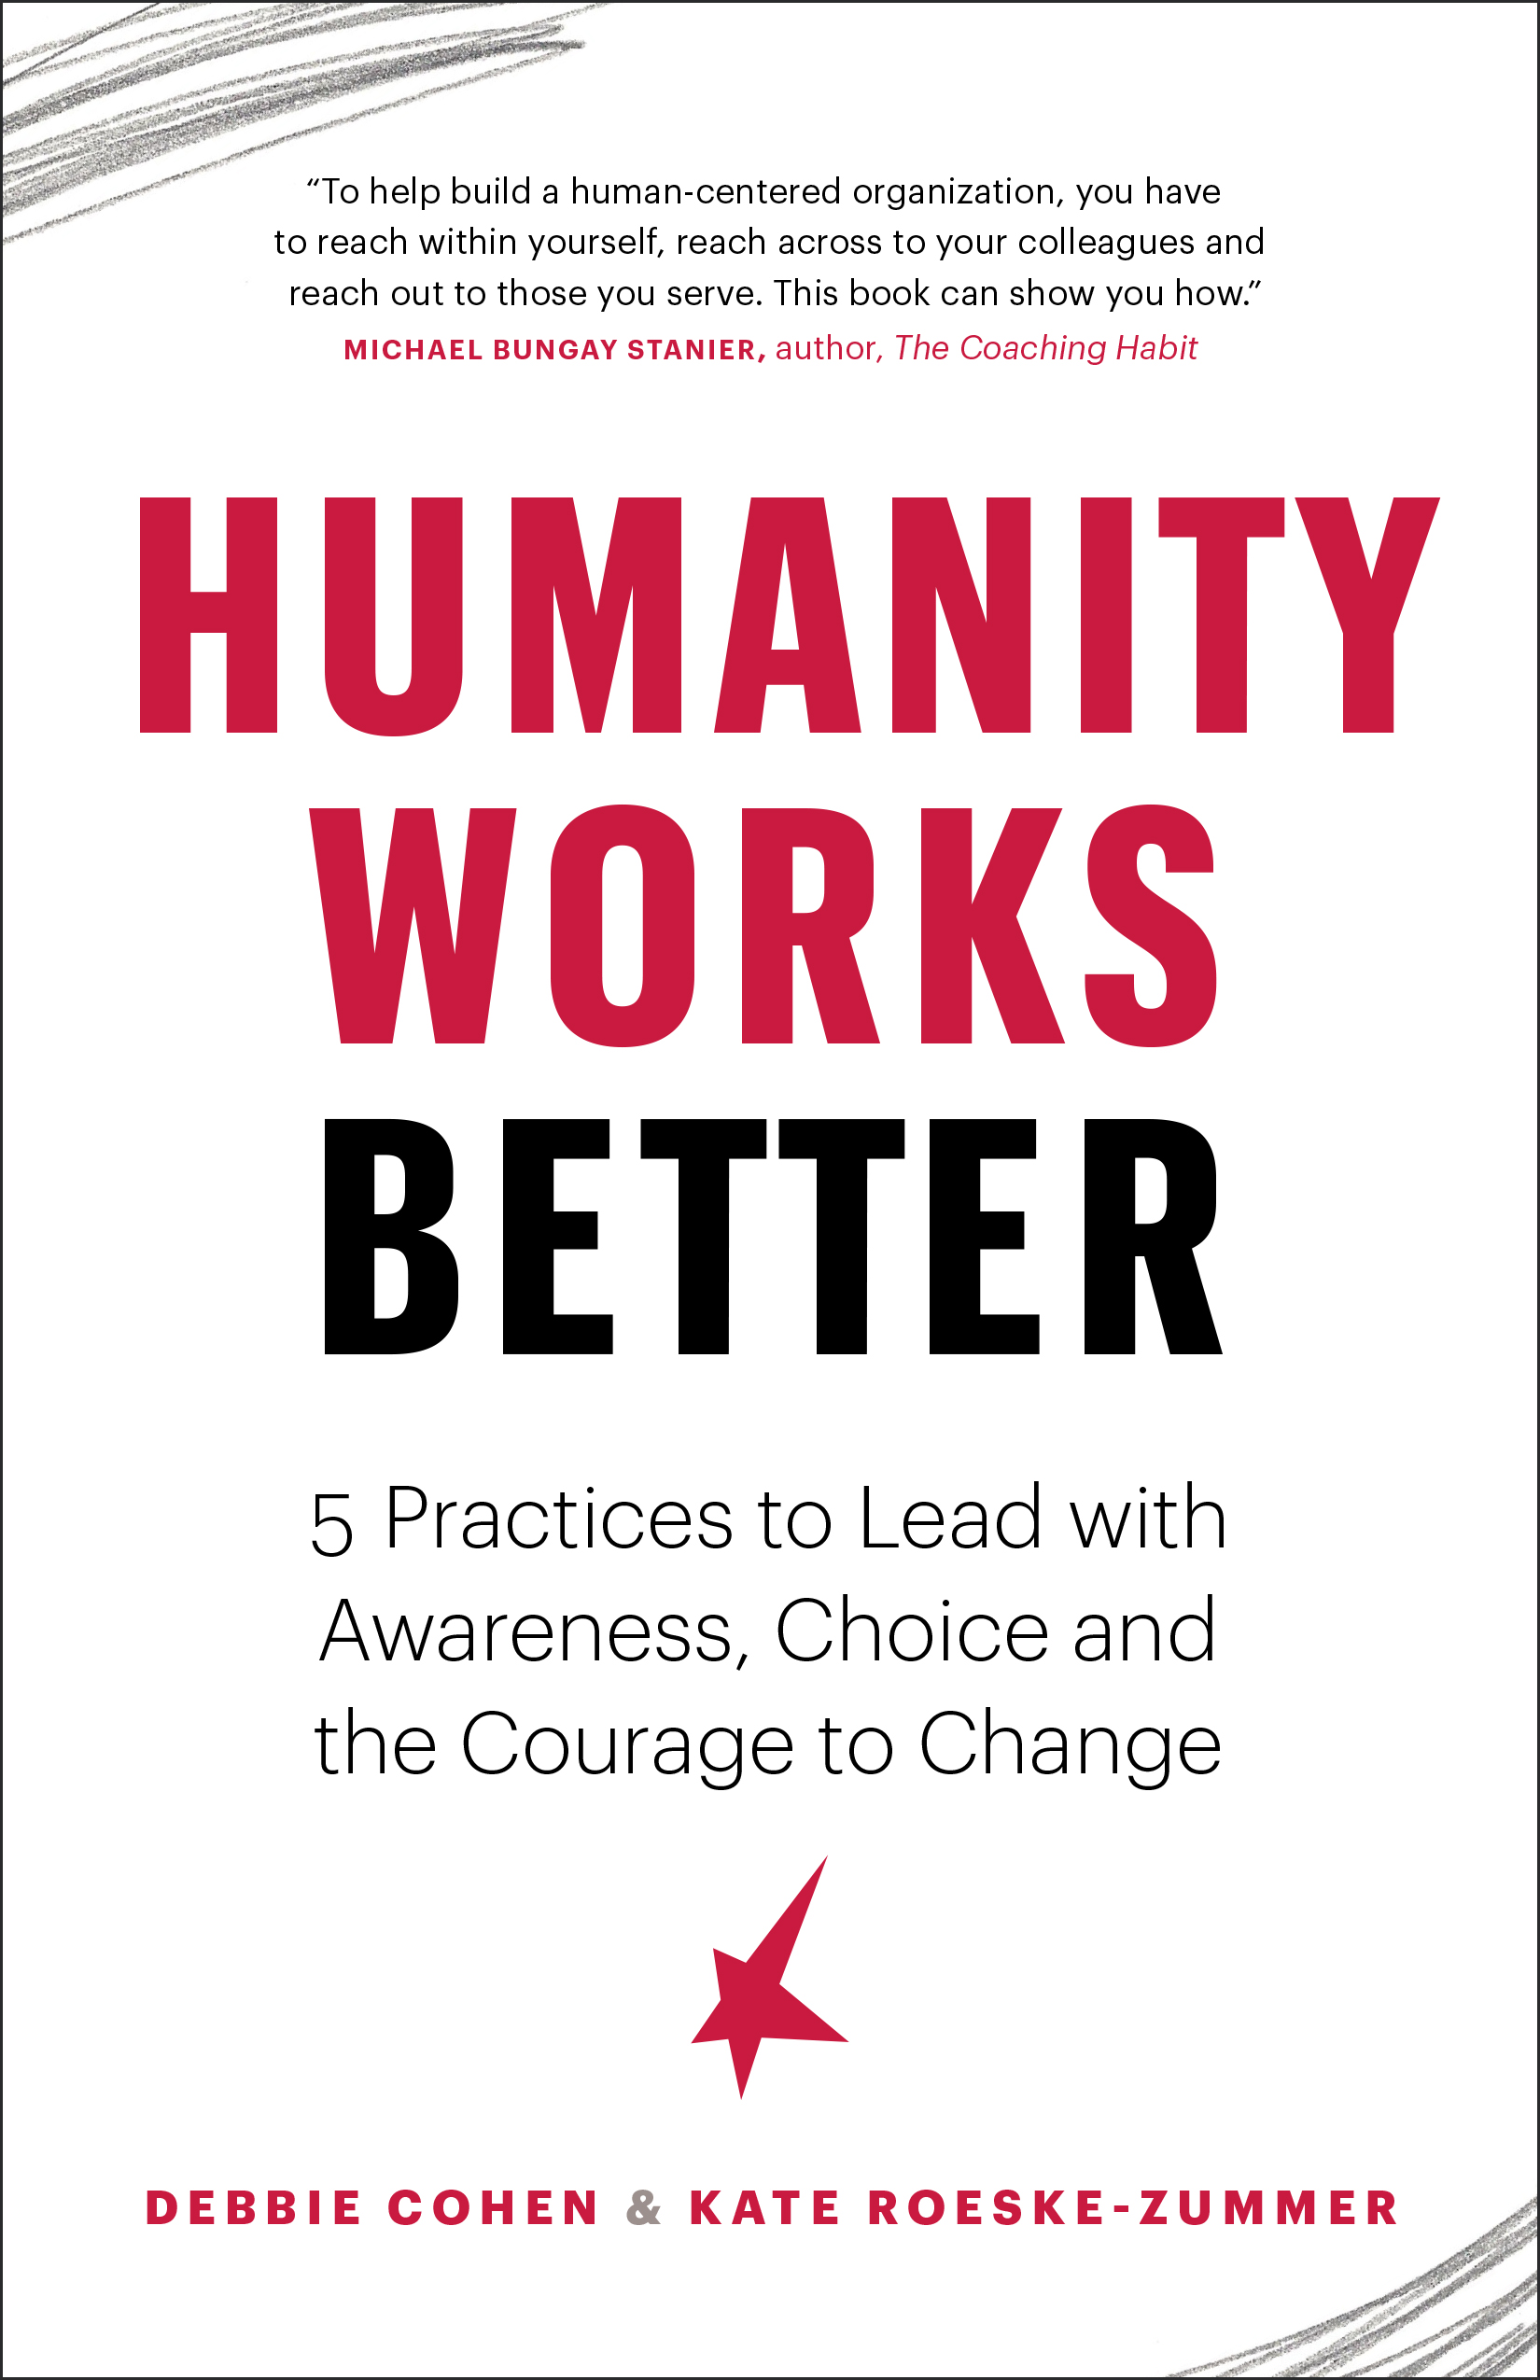 Humanity Works Better by Debbie Cohen and Kate Roekse-Zummer